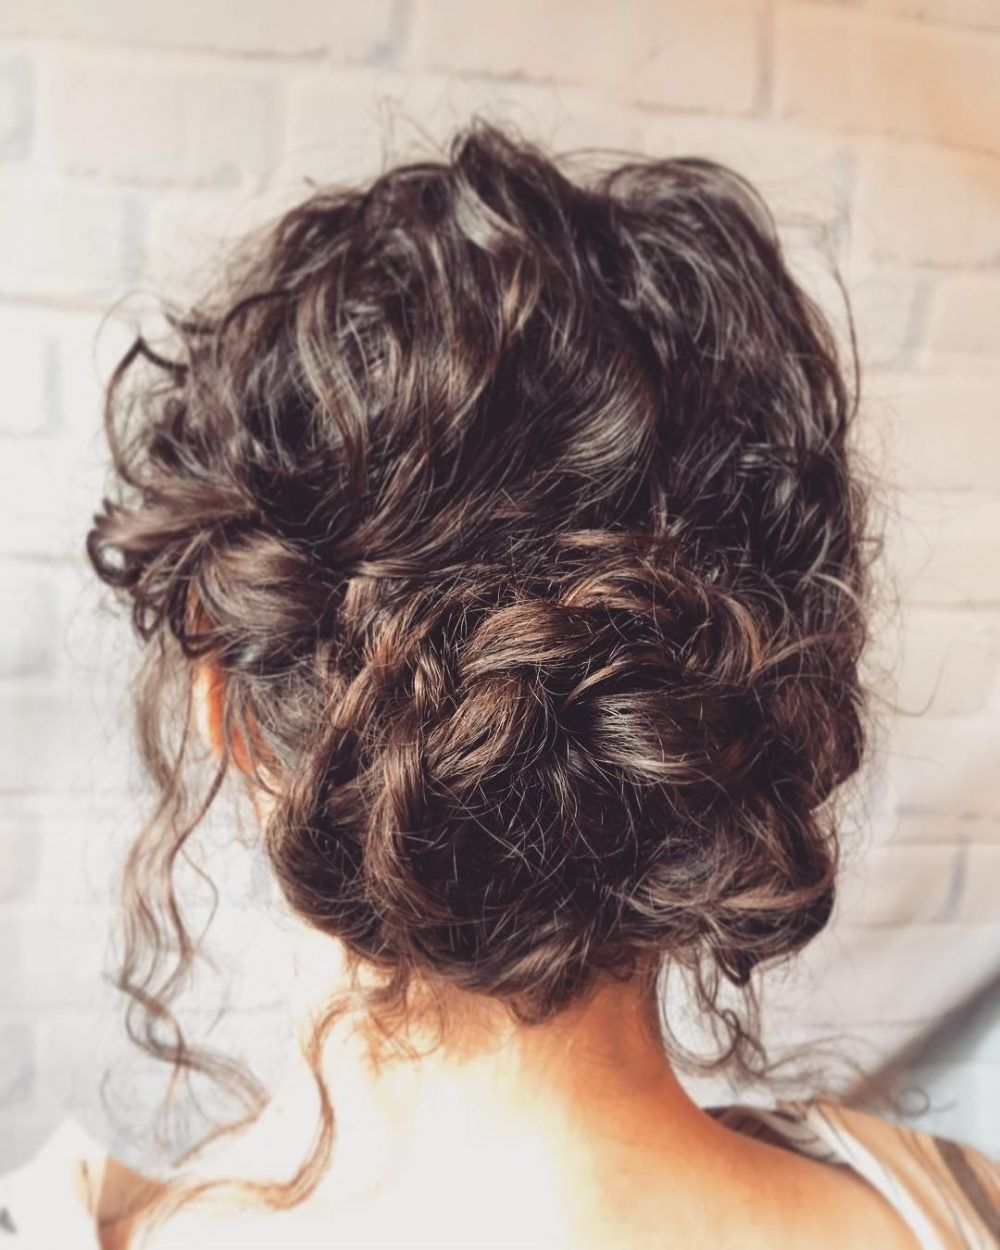 Best And Newest Curly Prom Prom Hairstyles For 18 Stunning Curly Prom Hairstyles For 2019 – Updos, Down Do's & Braids! (View 5 of 20)